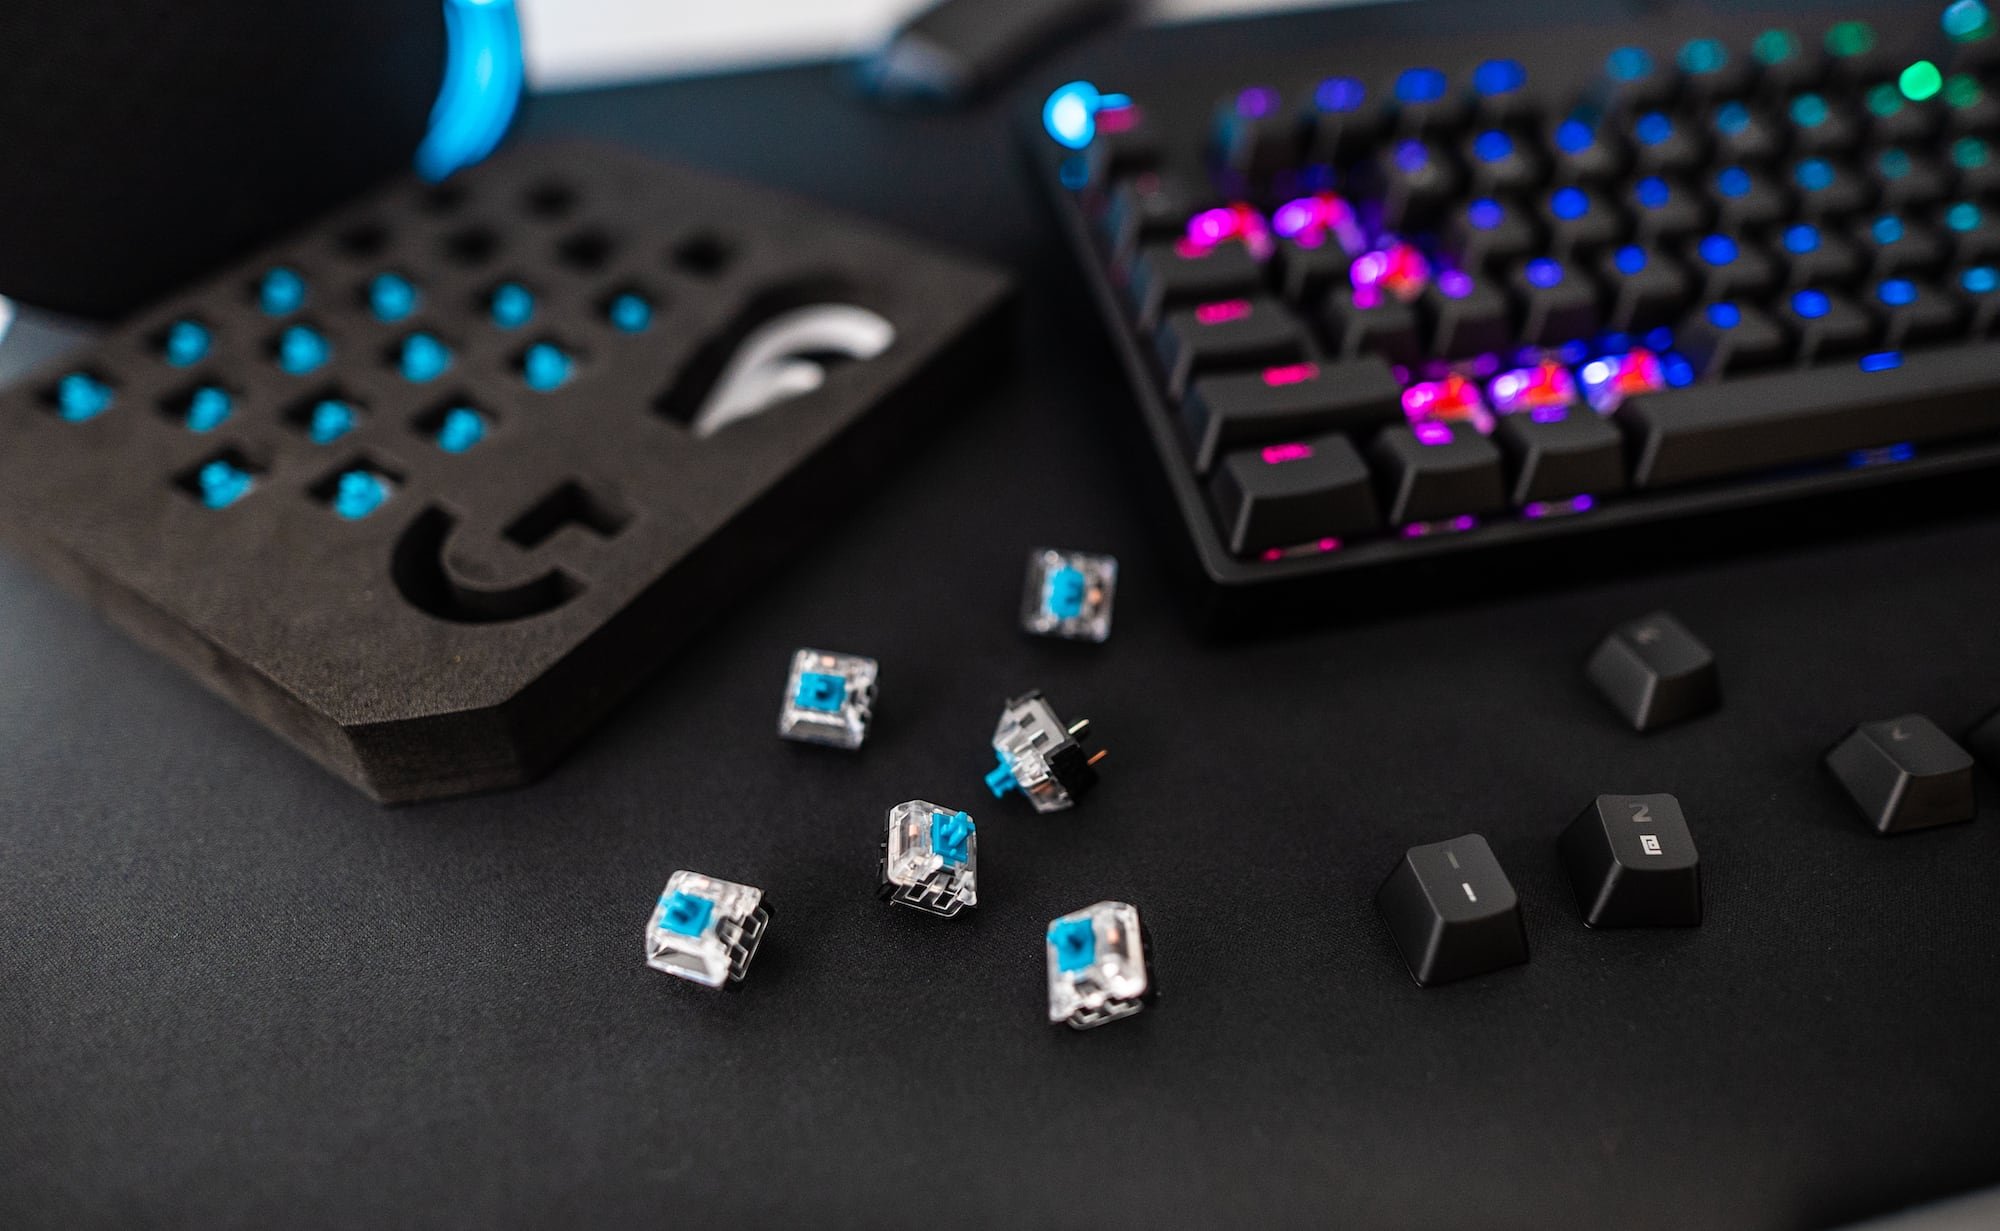 Logitech PRO X Gaming Keyboard is compact and customizable for professionals